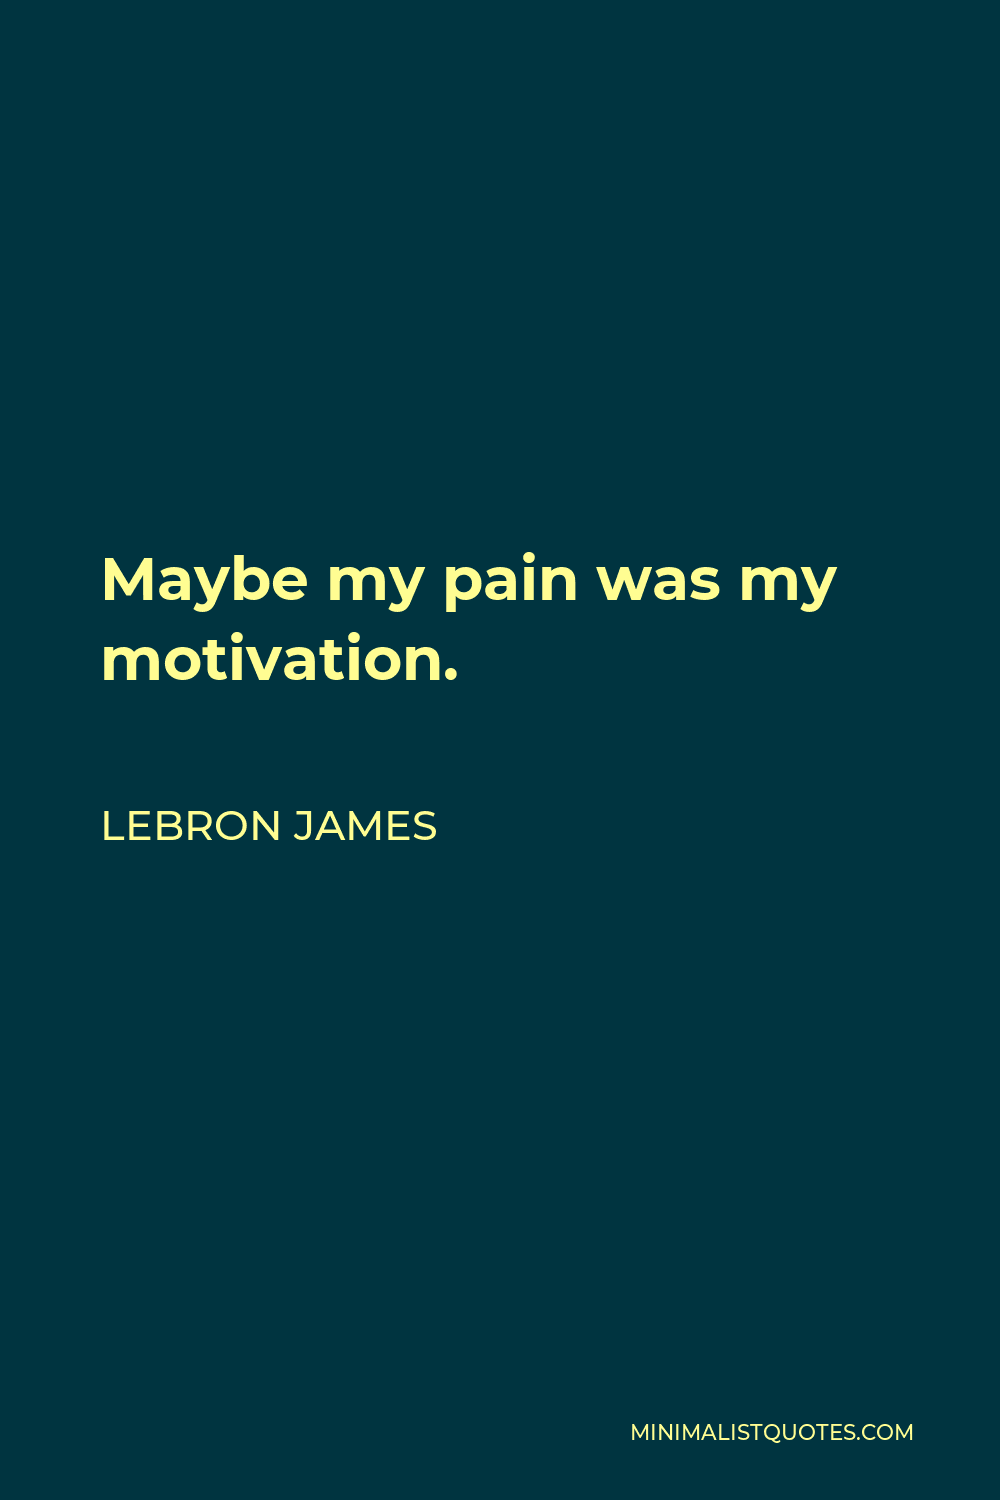 LeBron James Quote - Maybe my pain was my motivation.